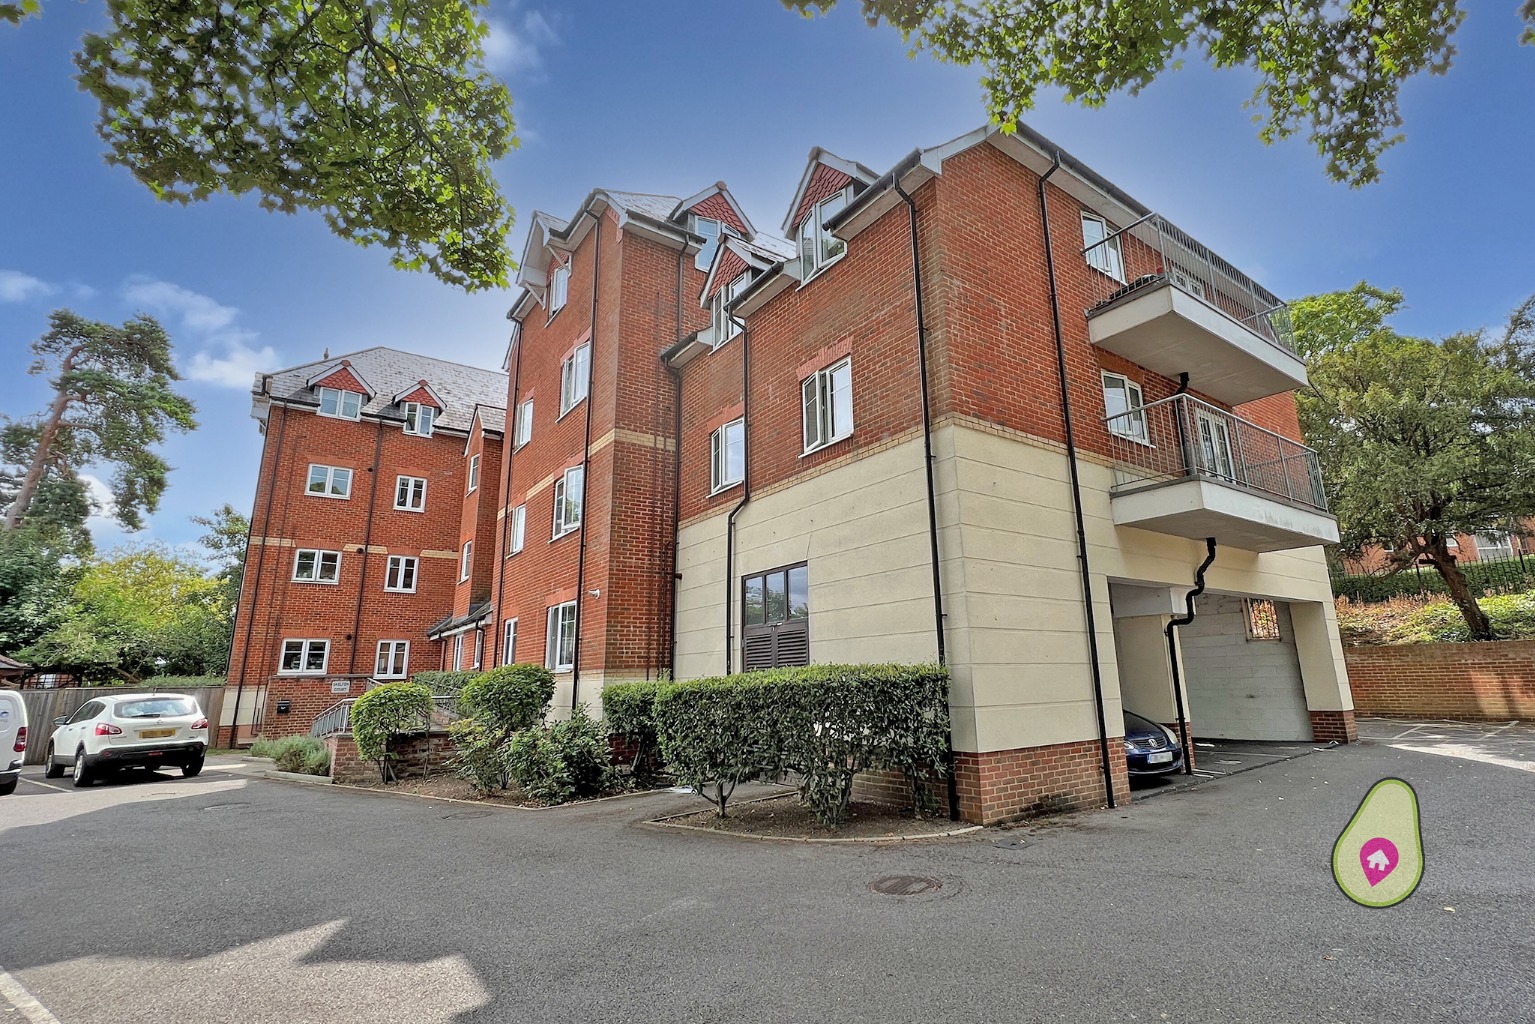 1 bed flat for sale - Property Image 1